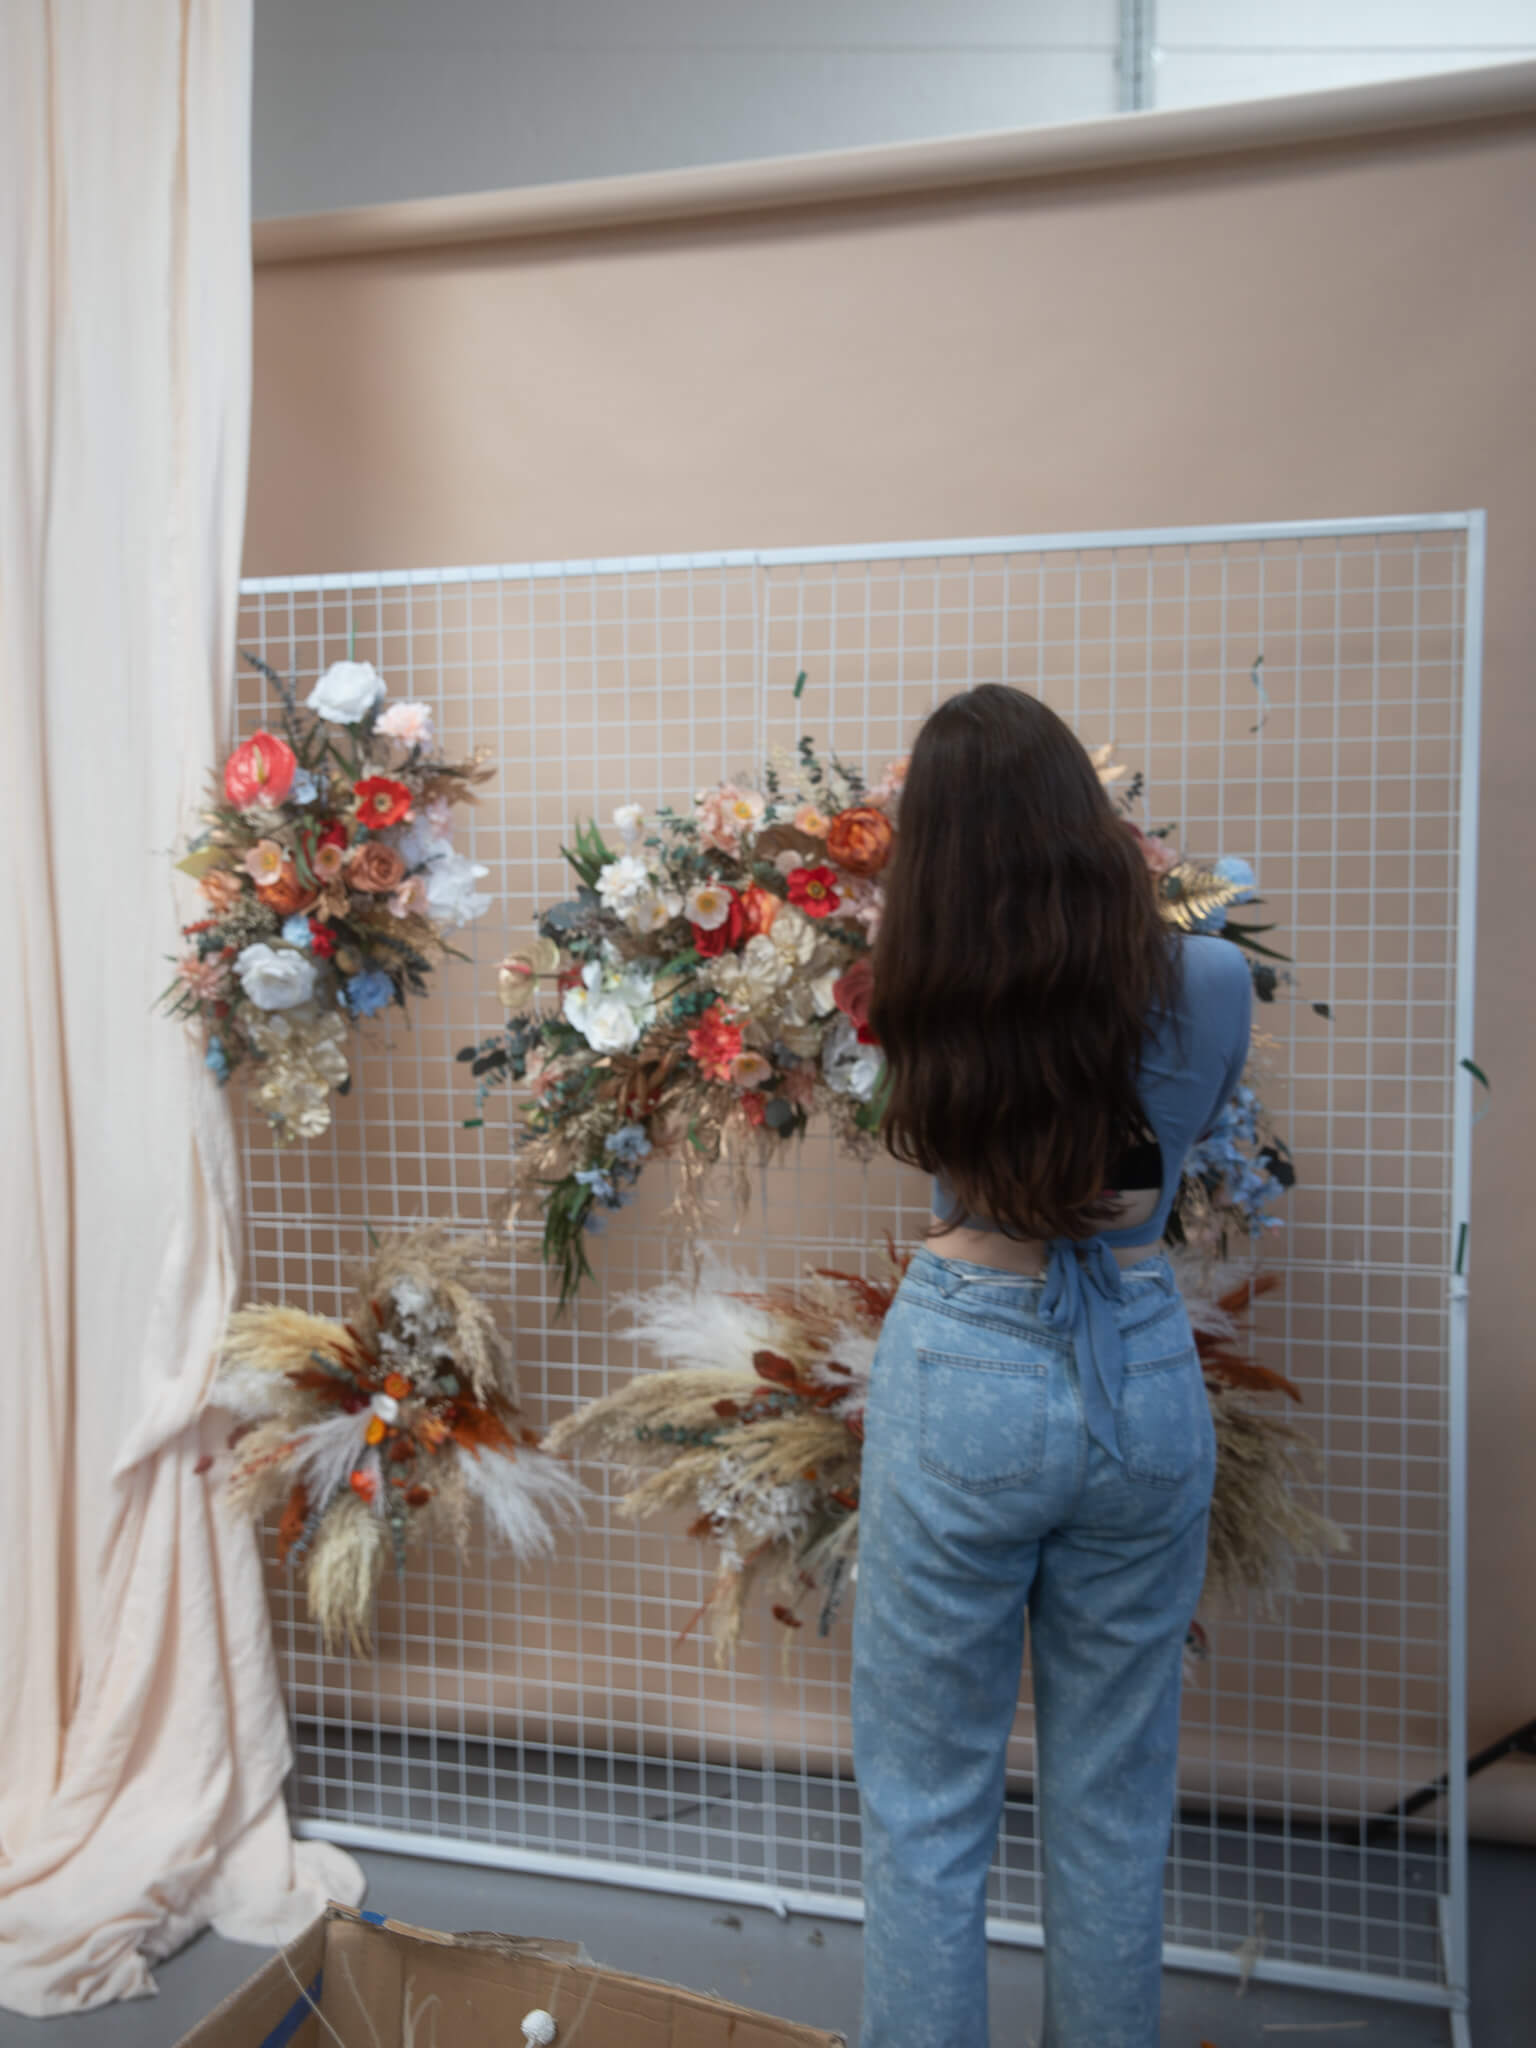 A person views an array of vibrant dried floral arrangements on a grid wall, showcasing an assortment of flowers and foliage in different colors and textures.